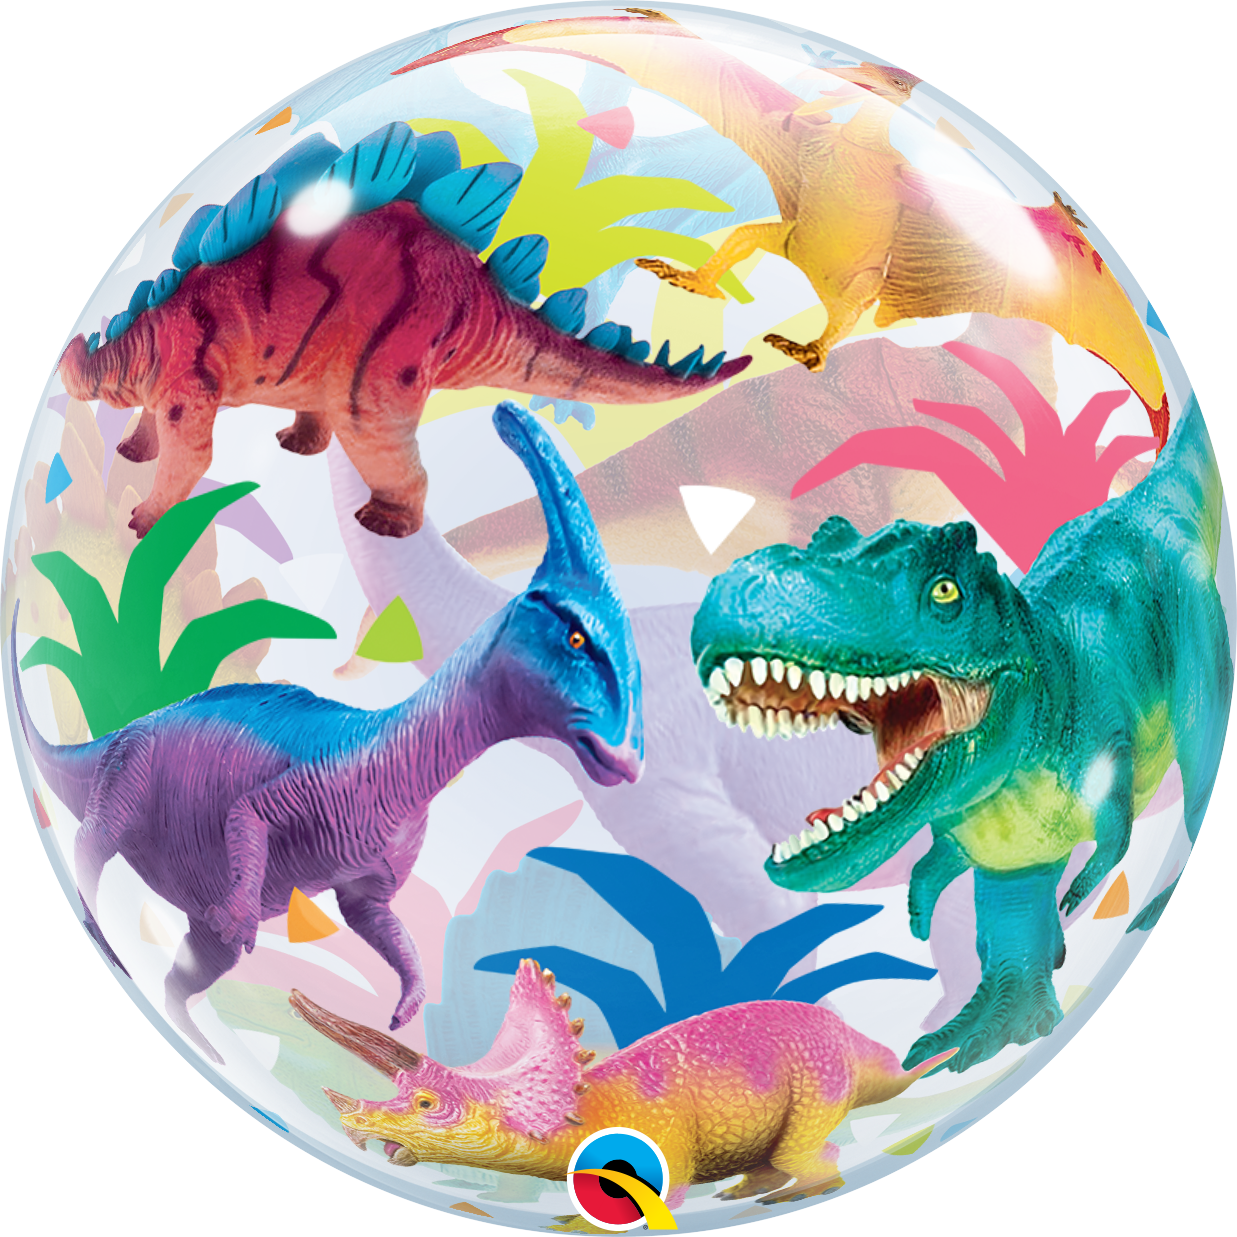 Colorful Dinosaurs 22 inch round